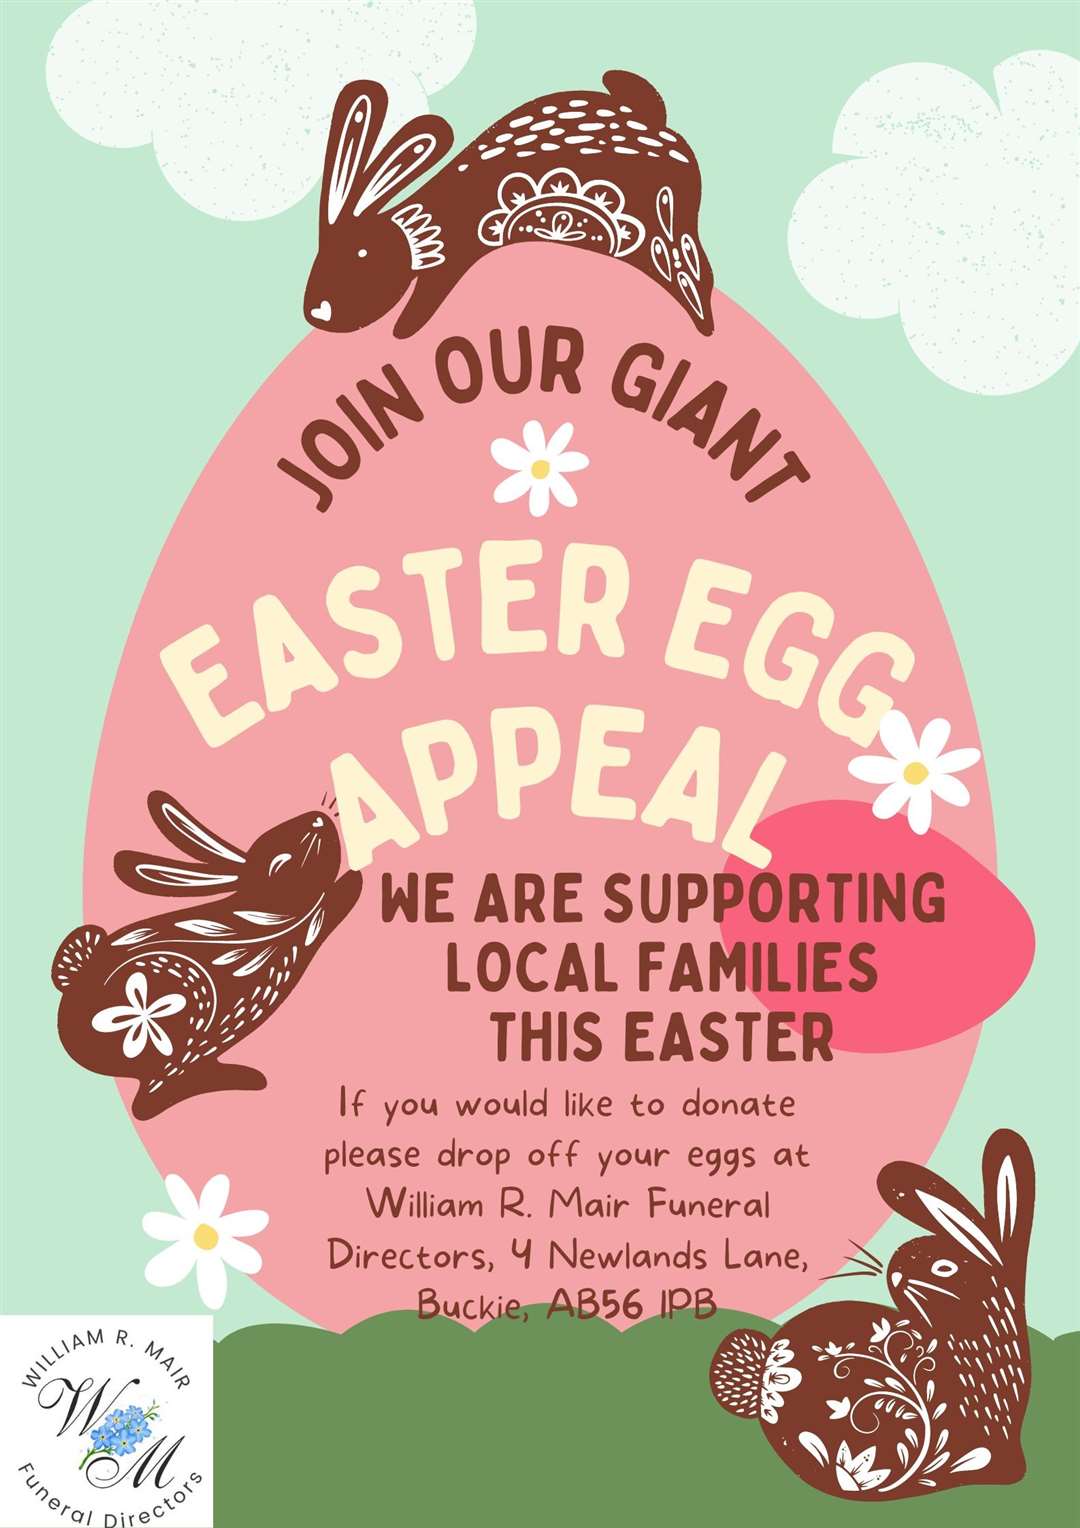 William R Mair Funeral Directors have launched their Easter egg appeal.